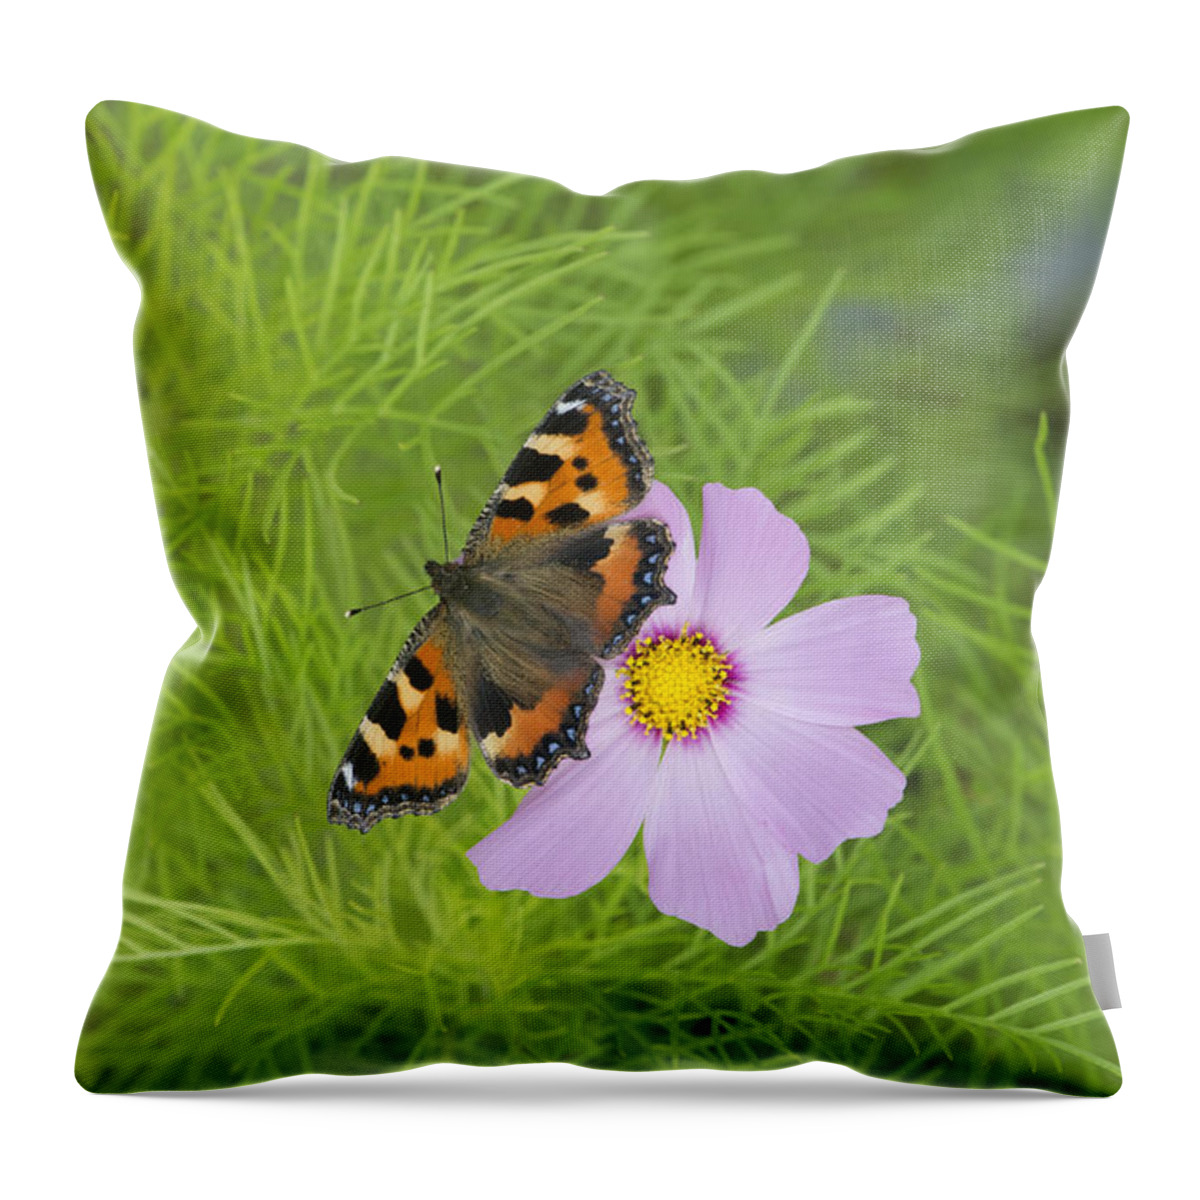 Aglais Urticae Throw Pillow featuring the photograph Small Tortoiseshell by Tim Gainey